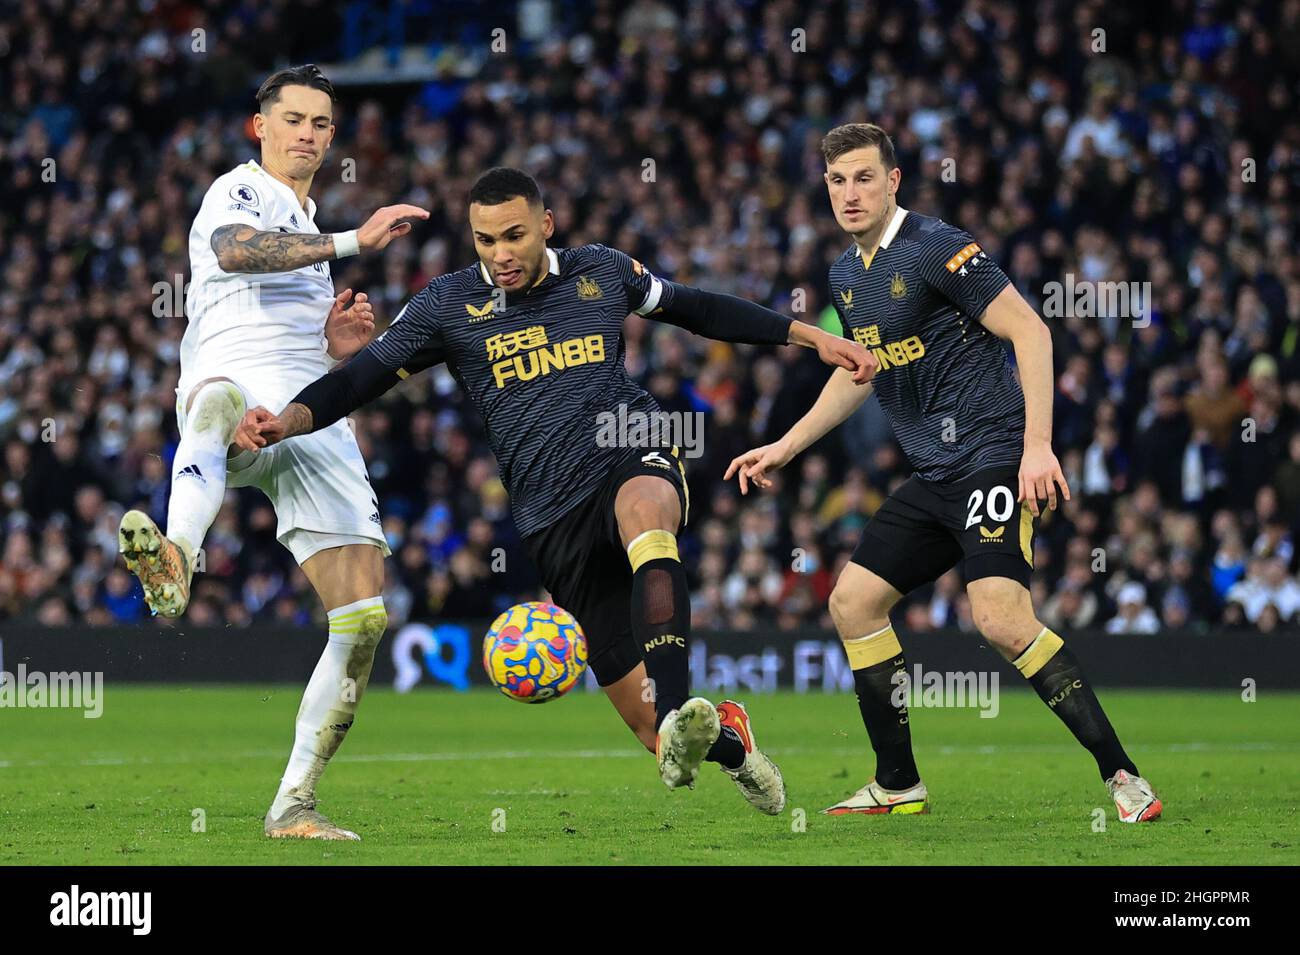 Leeds, UK. 22nd Jan, 2022. Jamaal Lascelles #6 of Newcastle United clears the ball during the Premier League fixture Leeds United vs Newcastle United at Elland Road, Leeds, UK, 22nd January 2022 Credit: News Images /Alamy Live News Stock Photo